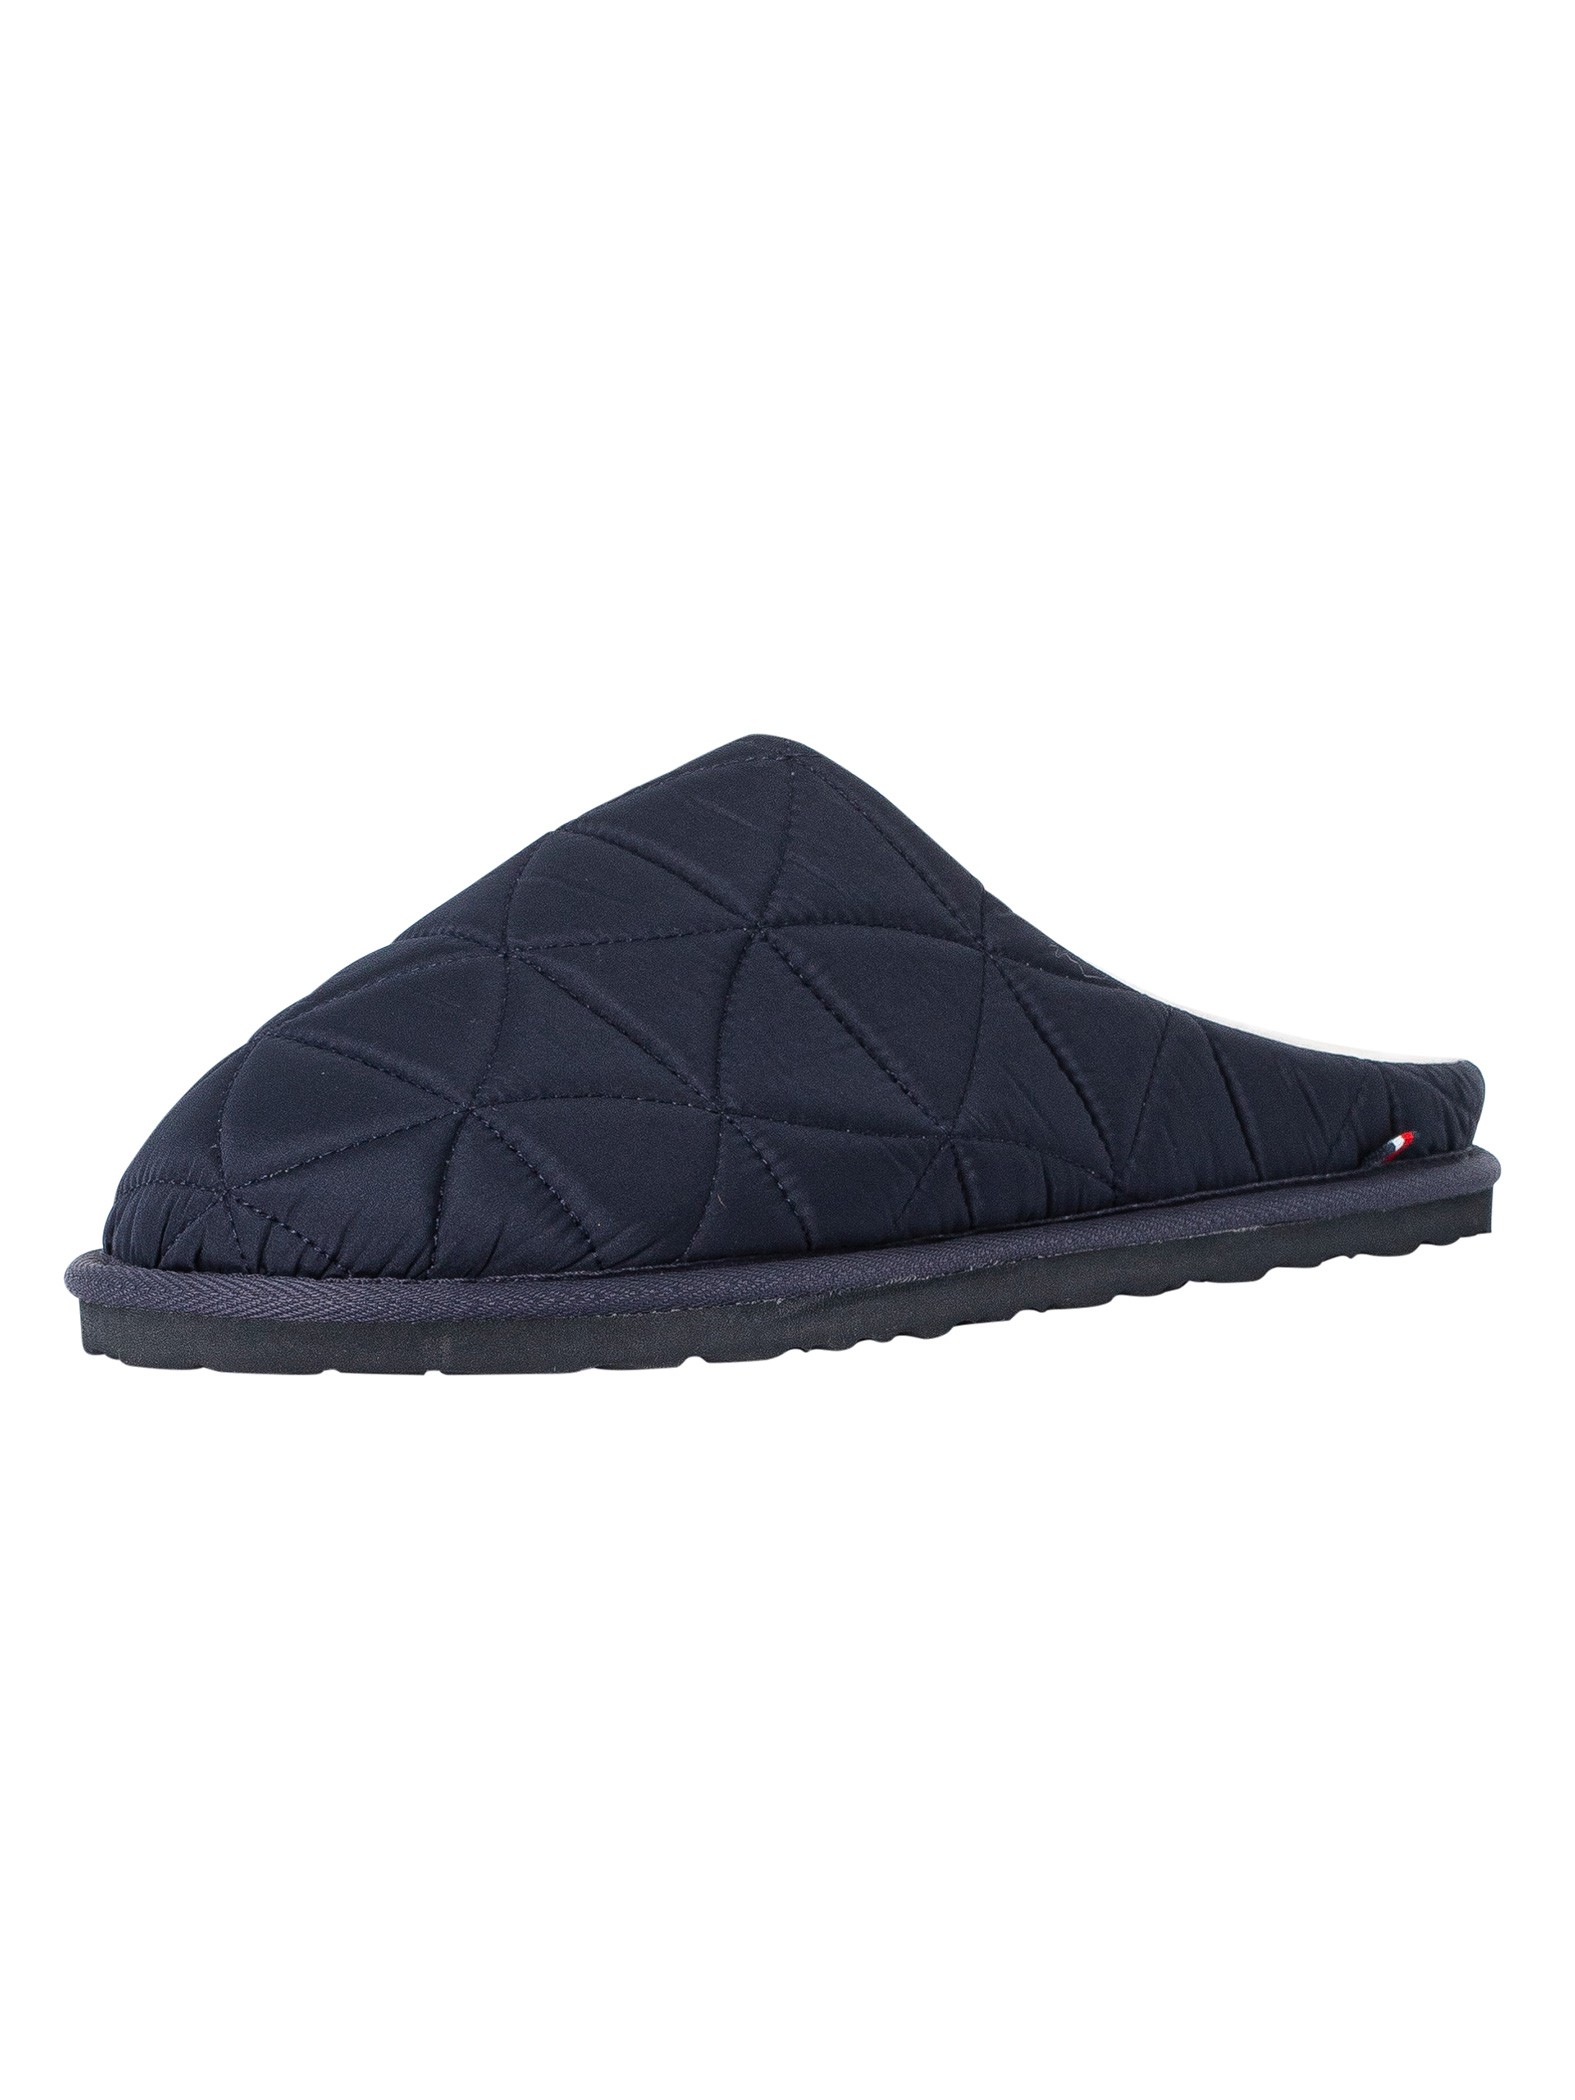 Nylon Home Slippers product